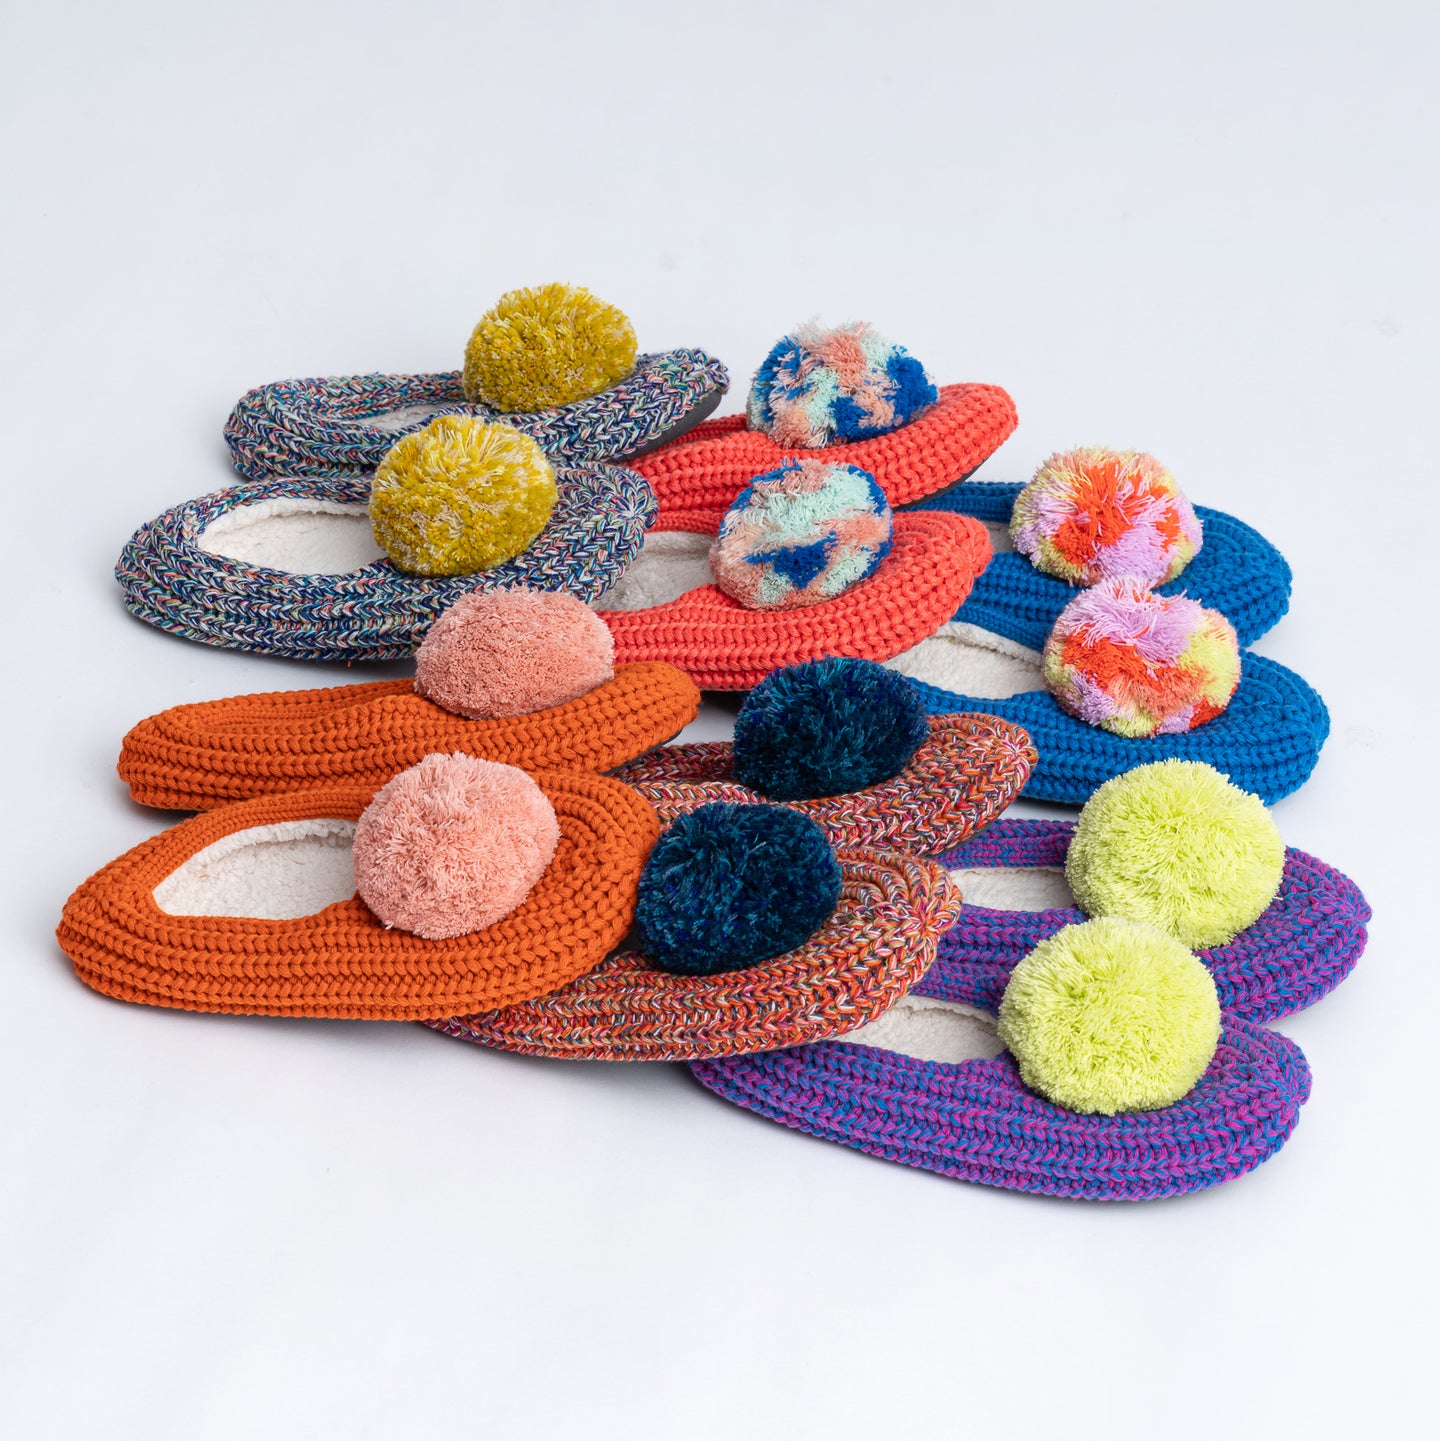 Variety Unique Different Cozy Pom Fluffy Knit Sock Rib Knitted Yarn Slippers Colorful